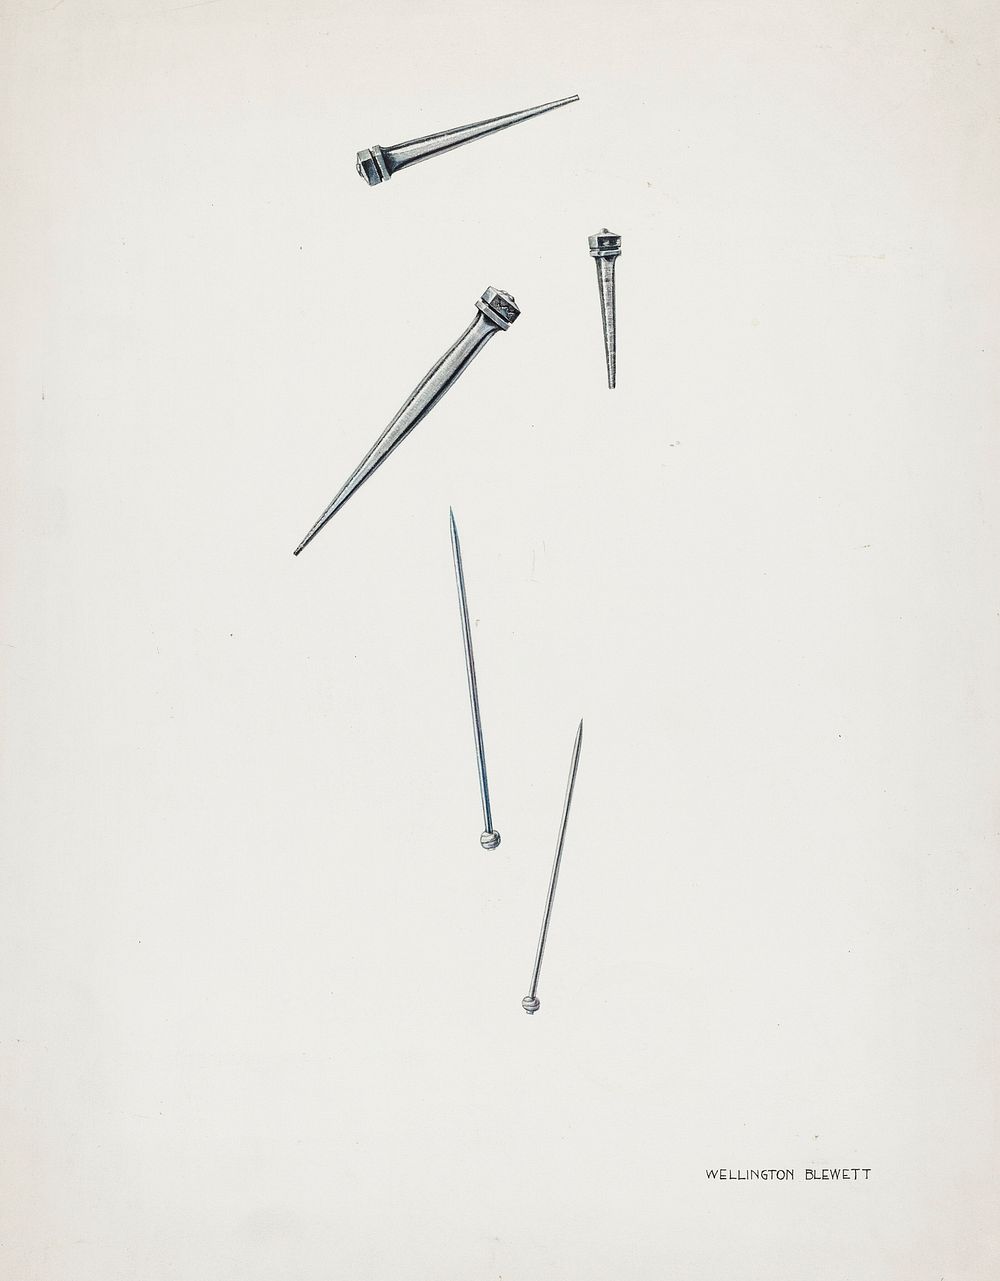 Nails and Pins (ca.1937) by Wellington Blewett. Original from The National Gallery of Art. Digitally enhanced by rawpixel.